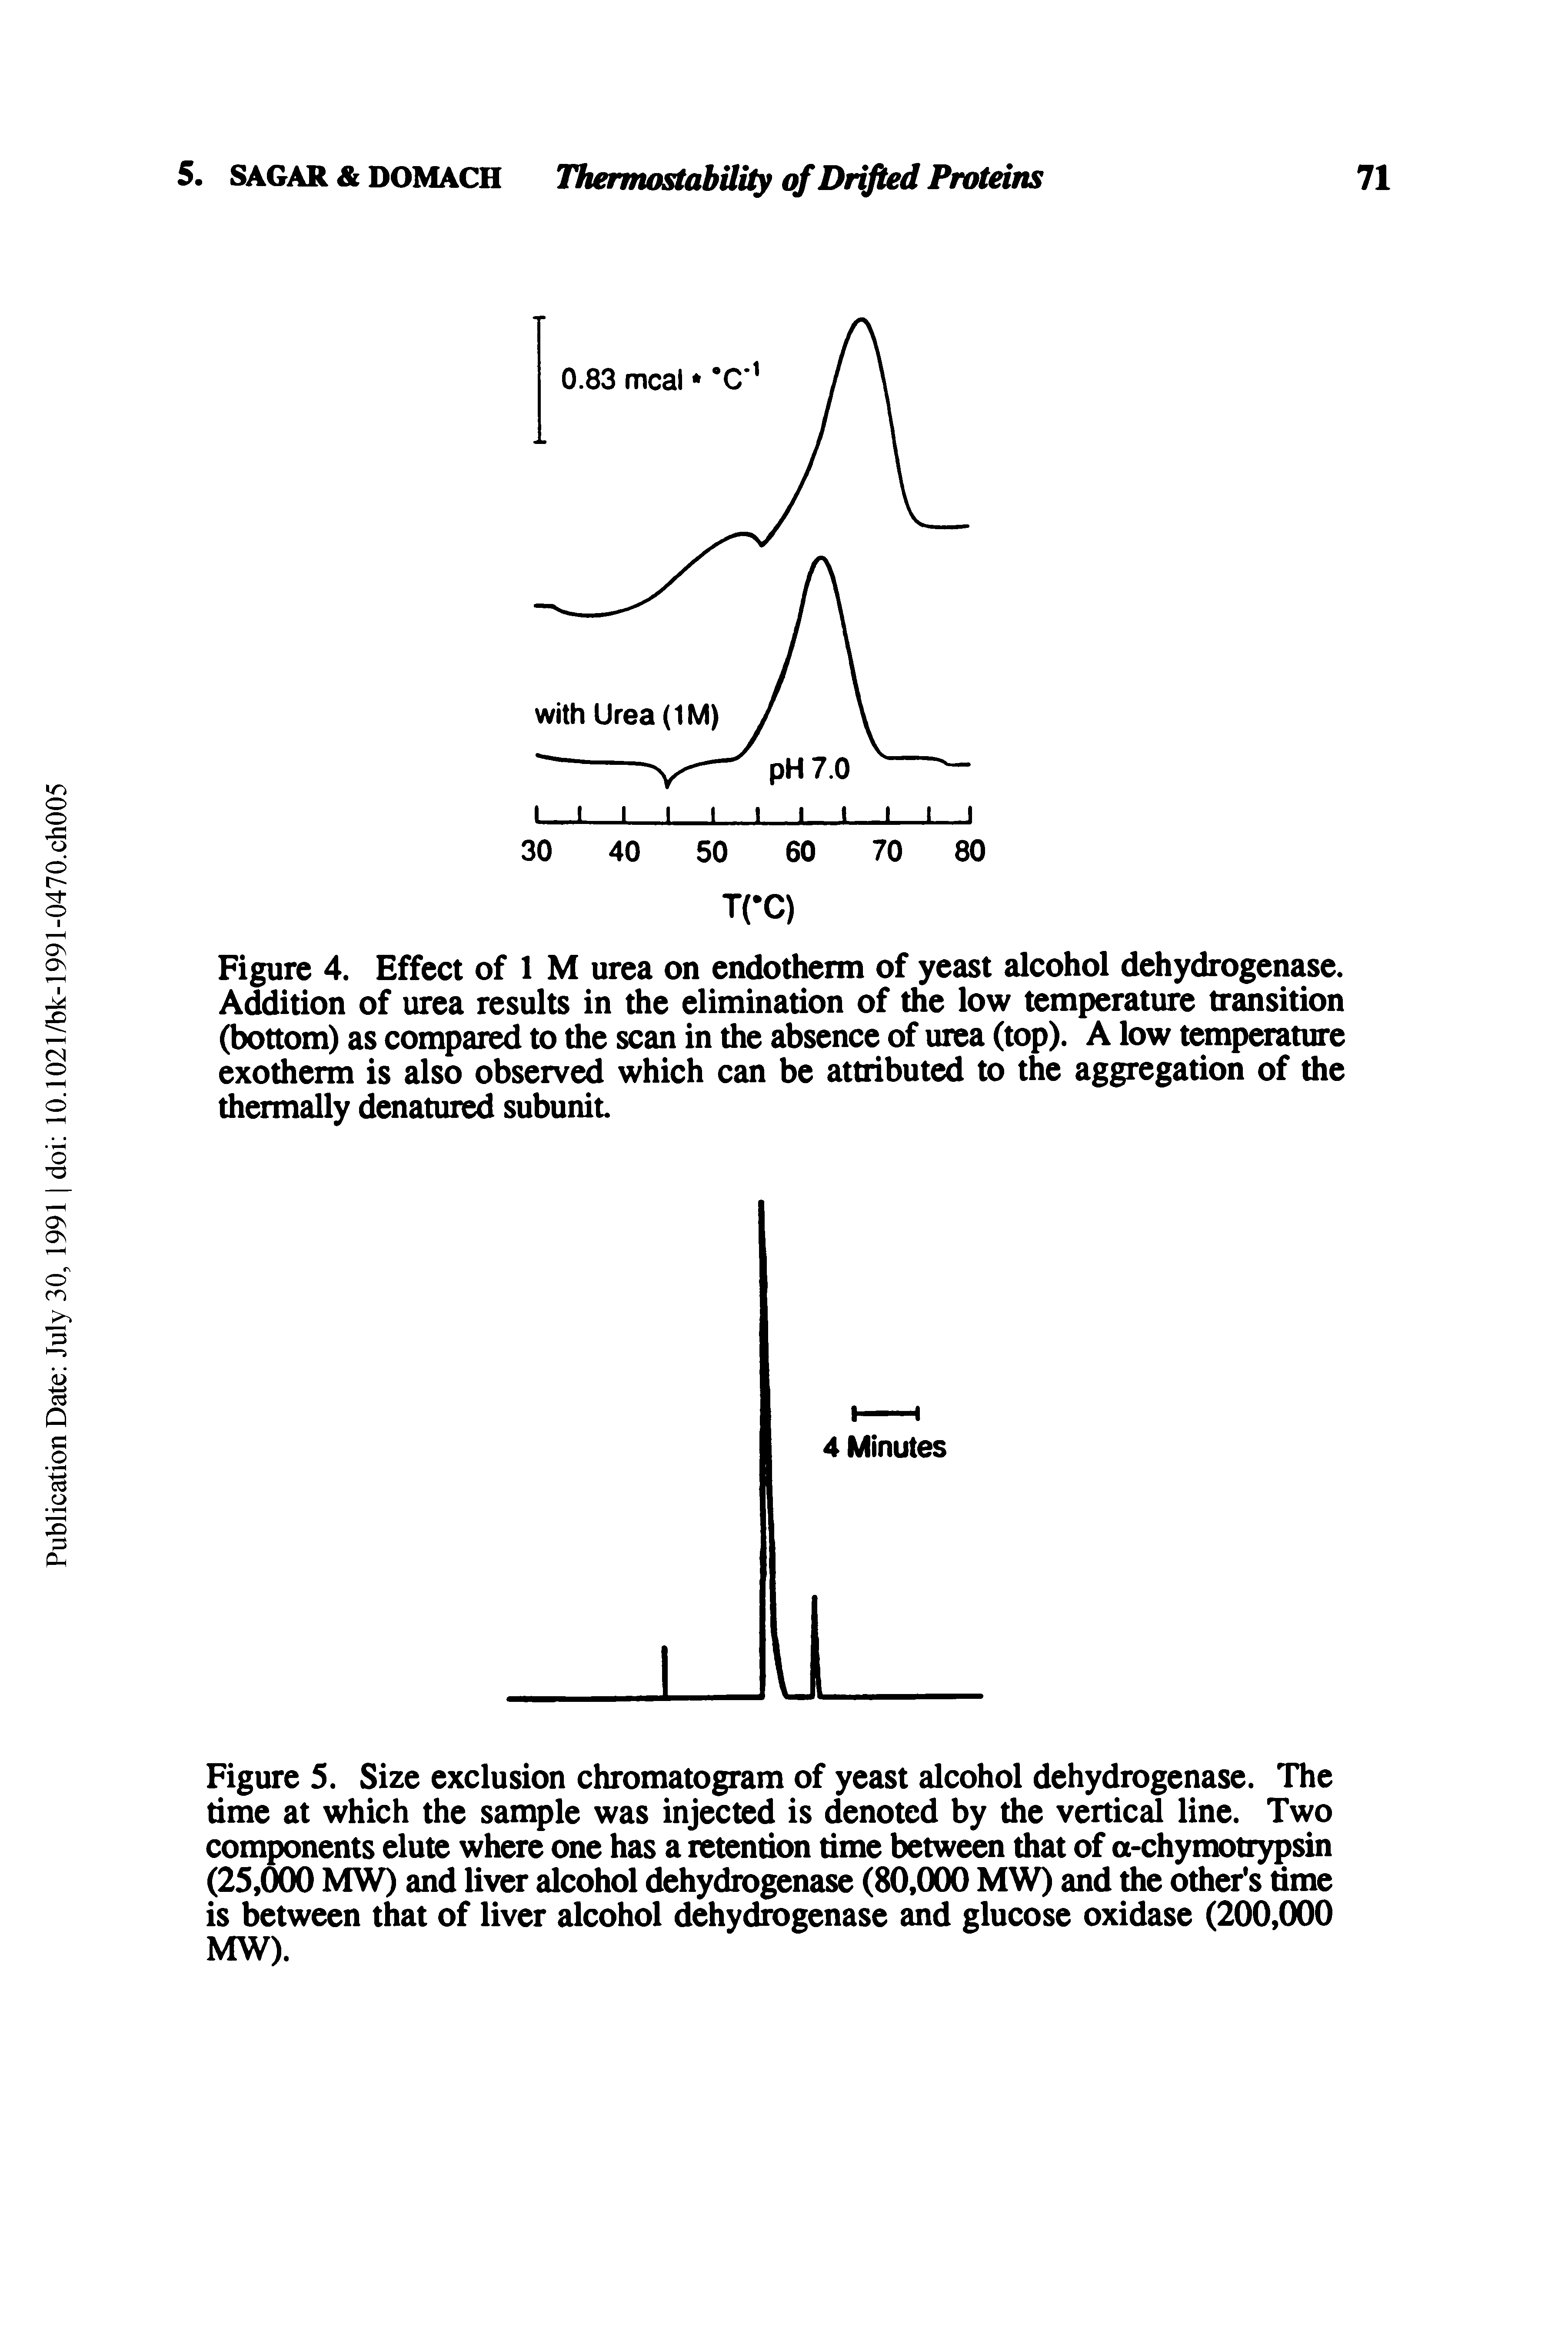 Figure 4. Effect of 1 M urea on endotherm of yeast alcohol dehydrogenase. Addition of urea results in the elimination of the low temperature transition (bottom) as compared to the scan in the absence of urea (top). A low temperature exotherm is also observed which can be attributed to the aggregation of the thermally denatured subunit...